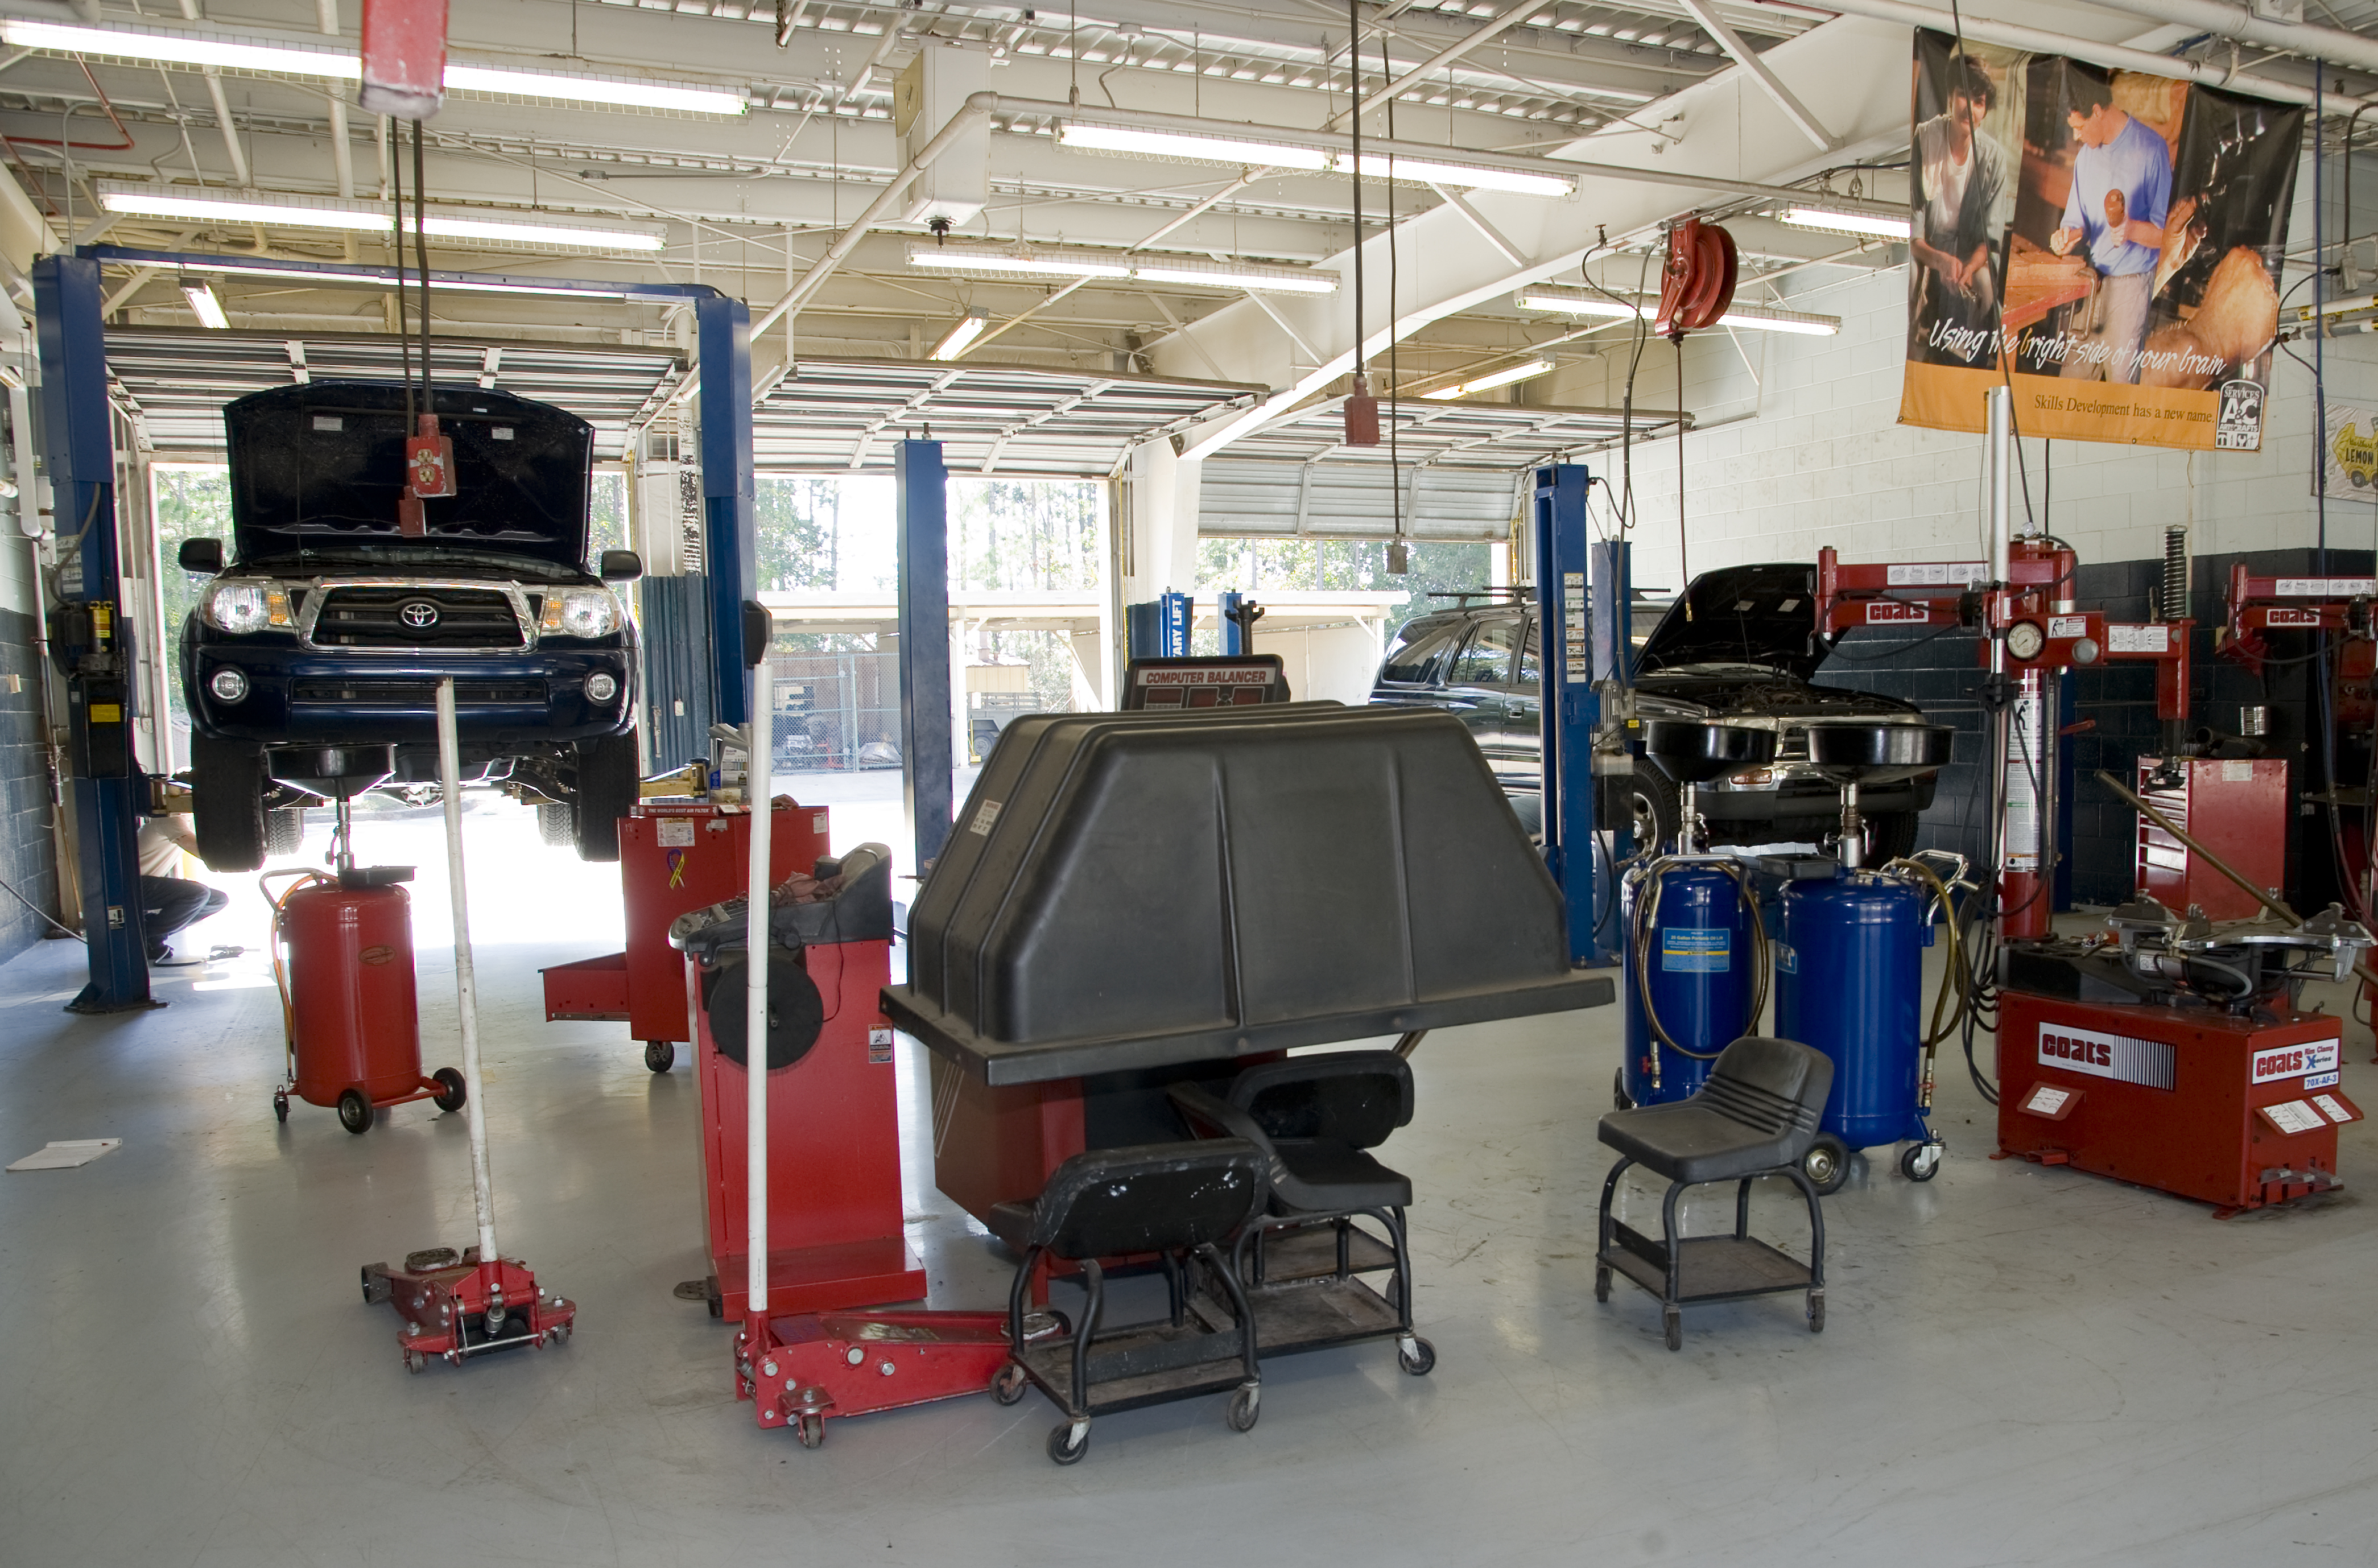 peterson afb auto hobby shop